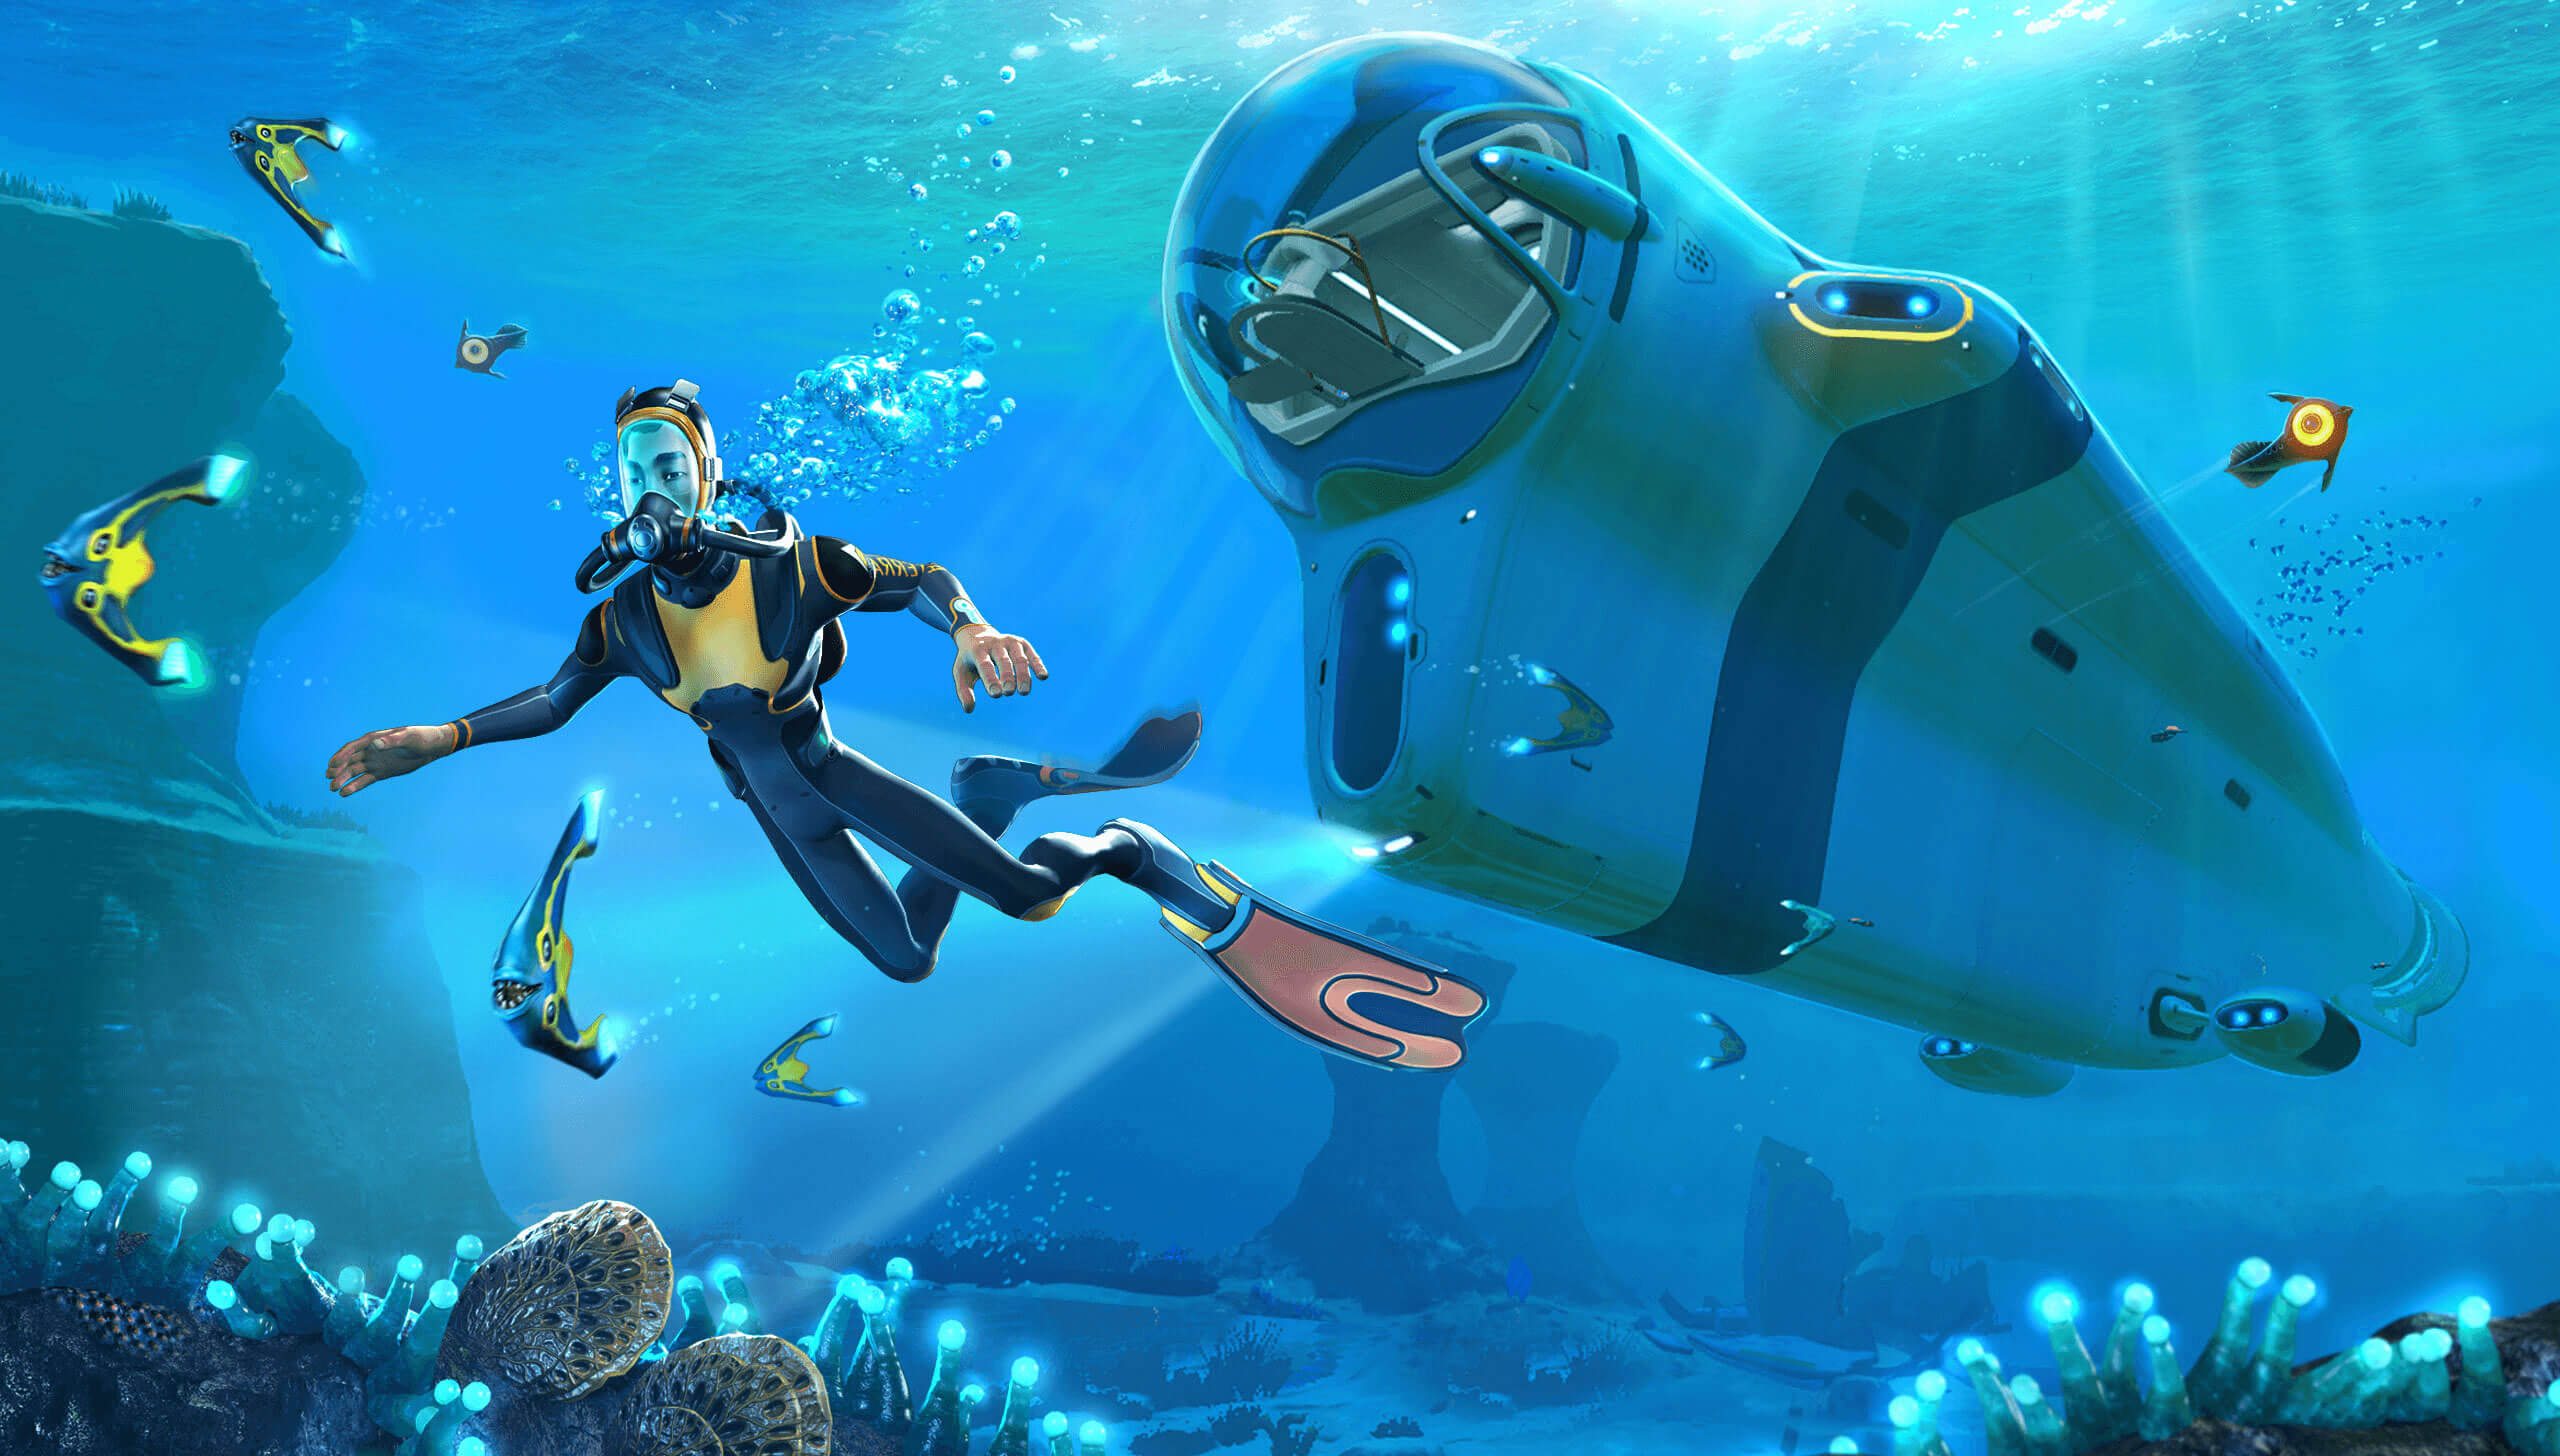 Subnautica PC Download Free Full Game For windows